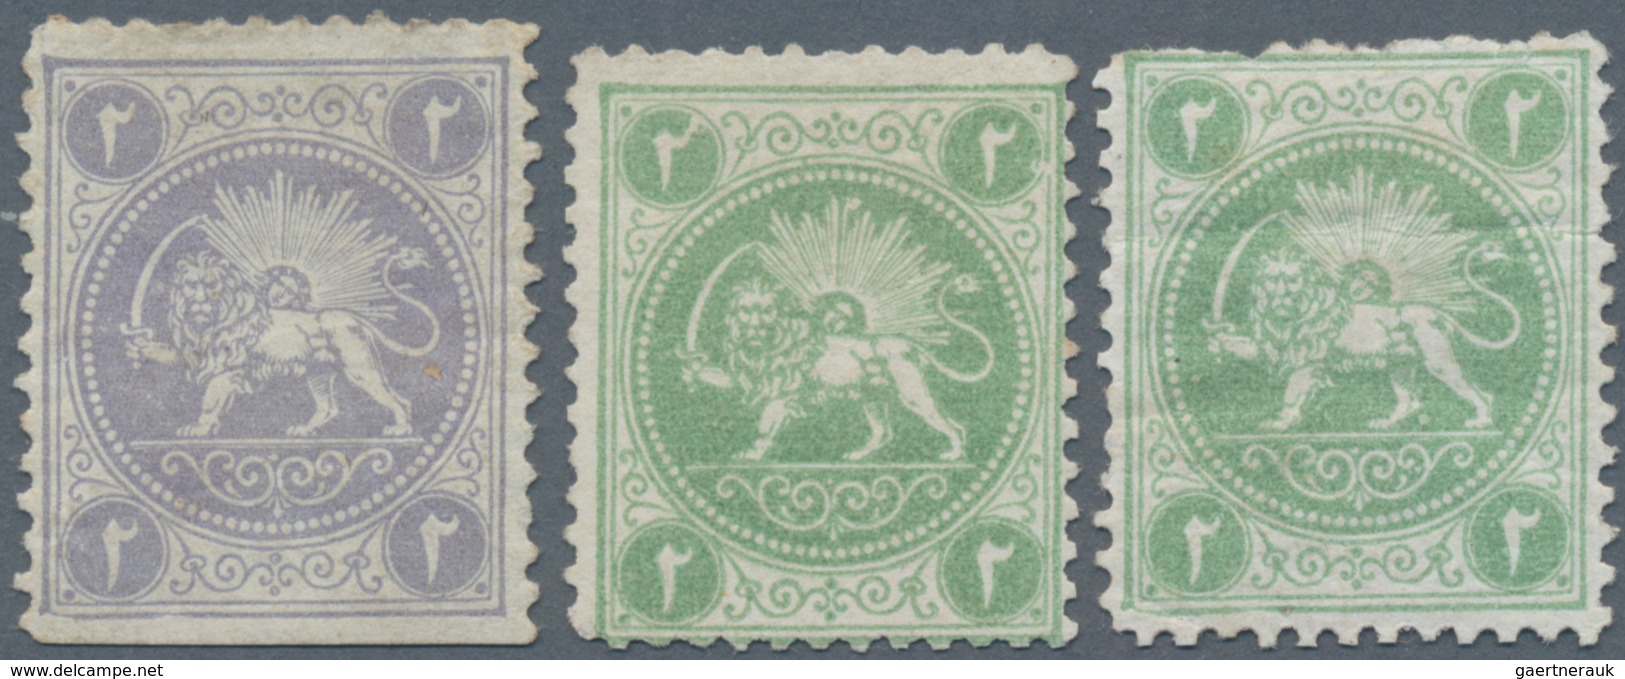 Iran: 1868, 2 Sh. Green And Violet, Three Barre Essays Lion Issue, One Thin And Minor Faults, Fine, - Iran